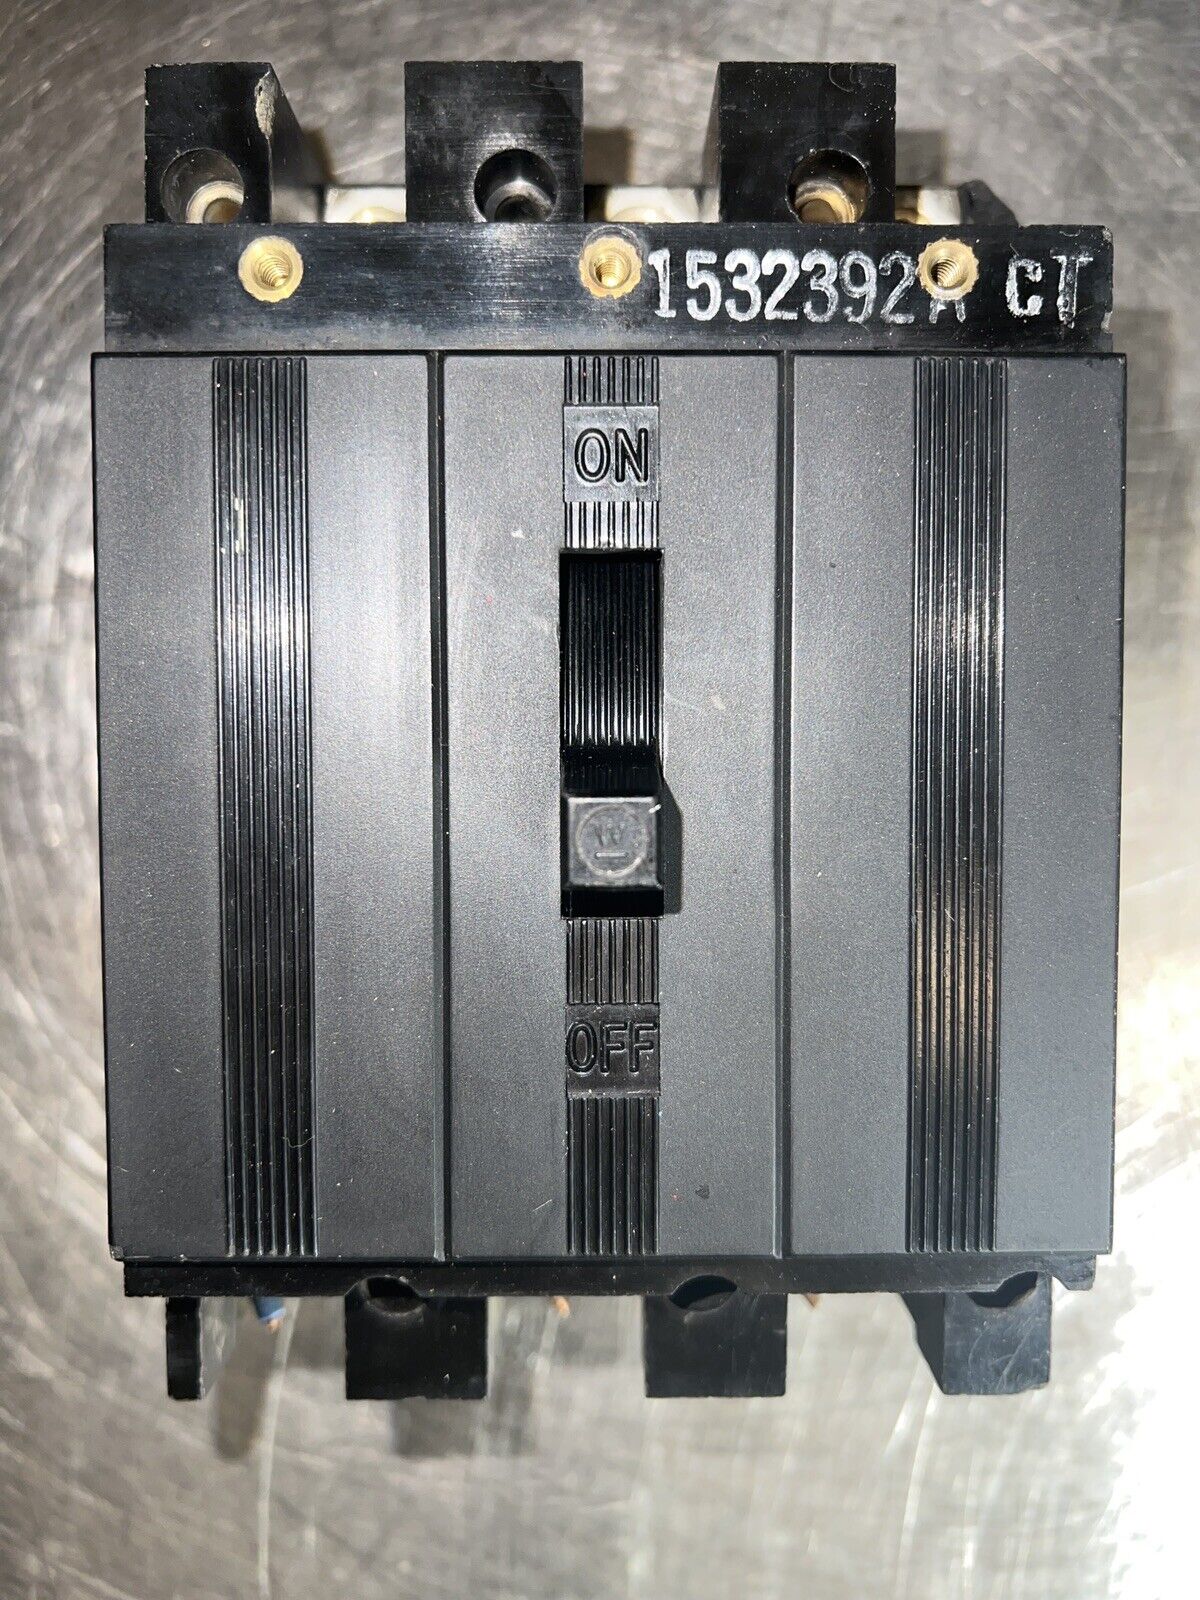 Westinghouse 1532392ACT 15A Circuit Breaker